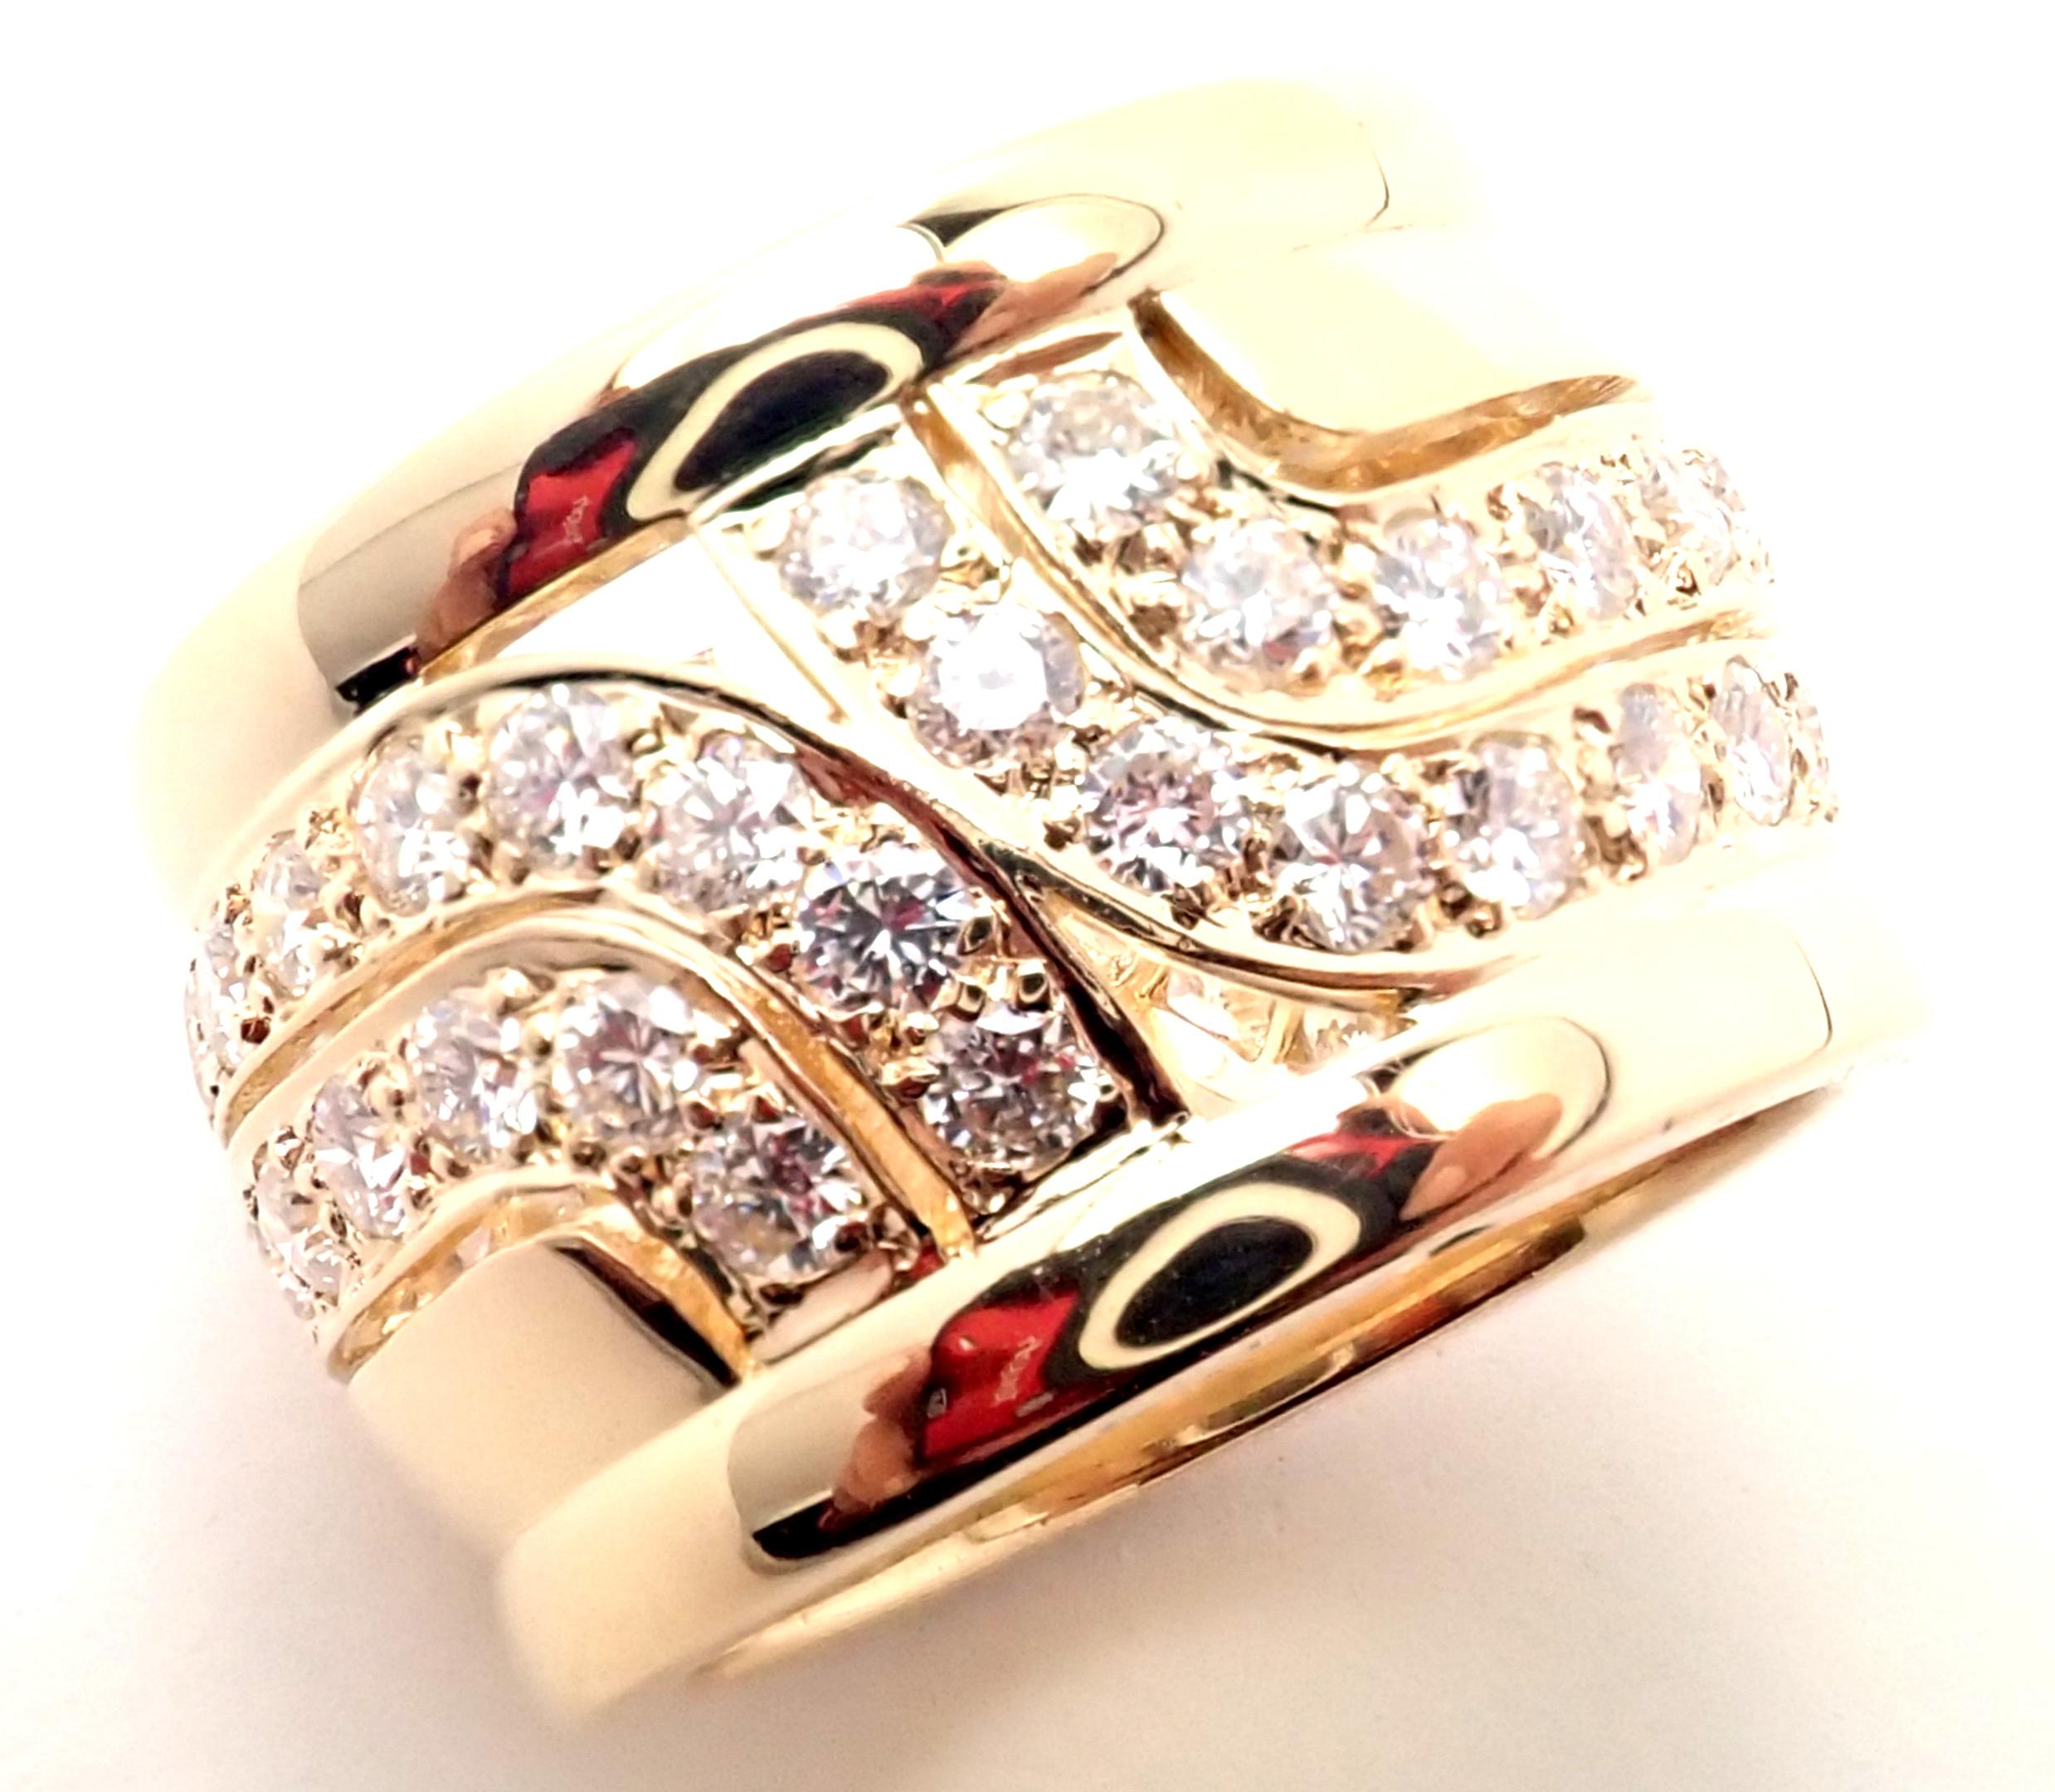 Cartier Diamond Wide Yellow Gold Band Ring In Excellent Condition For Sale In Holland, PA